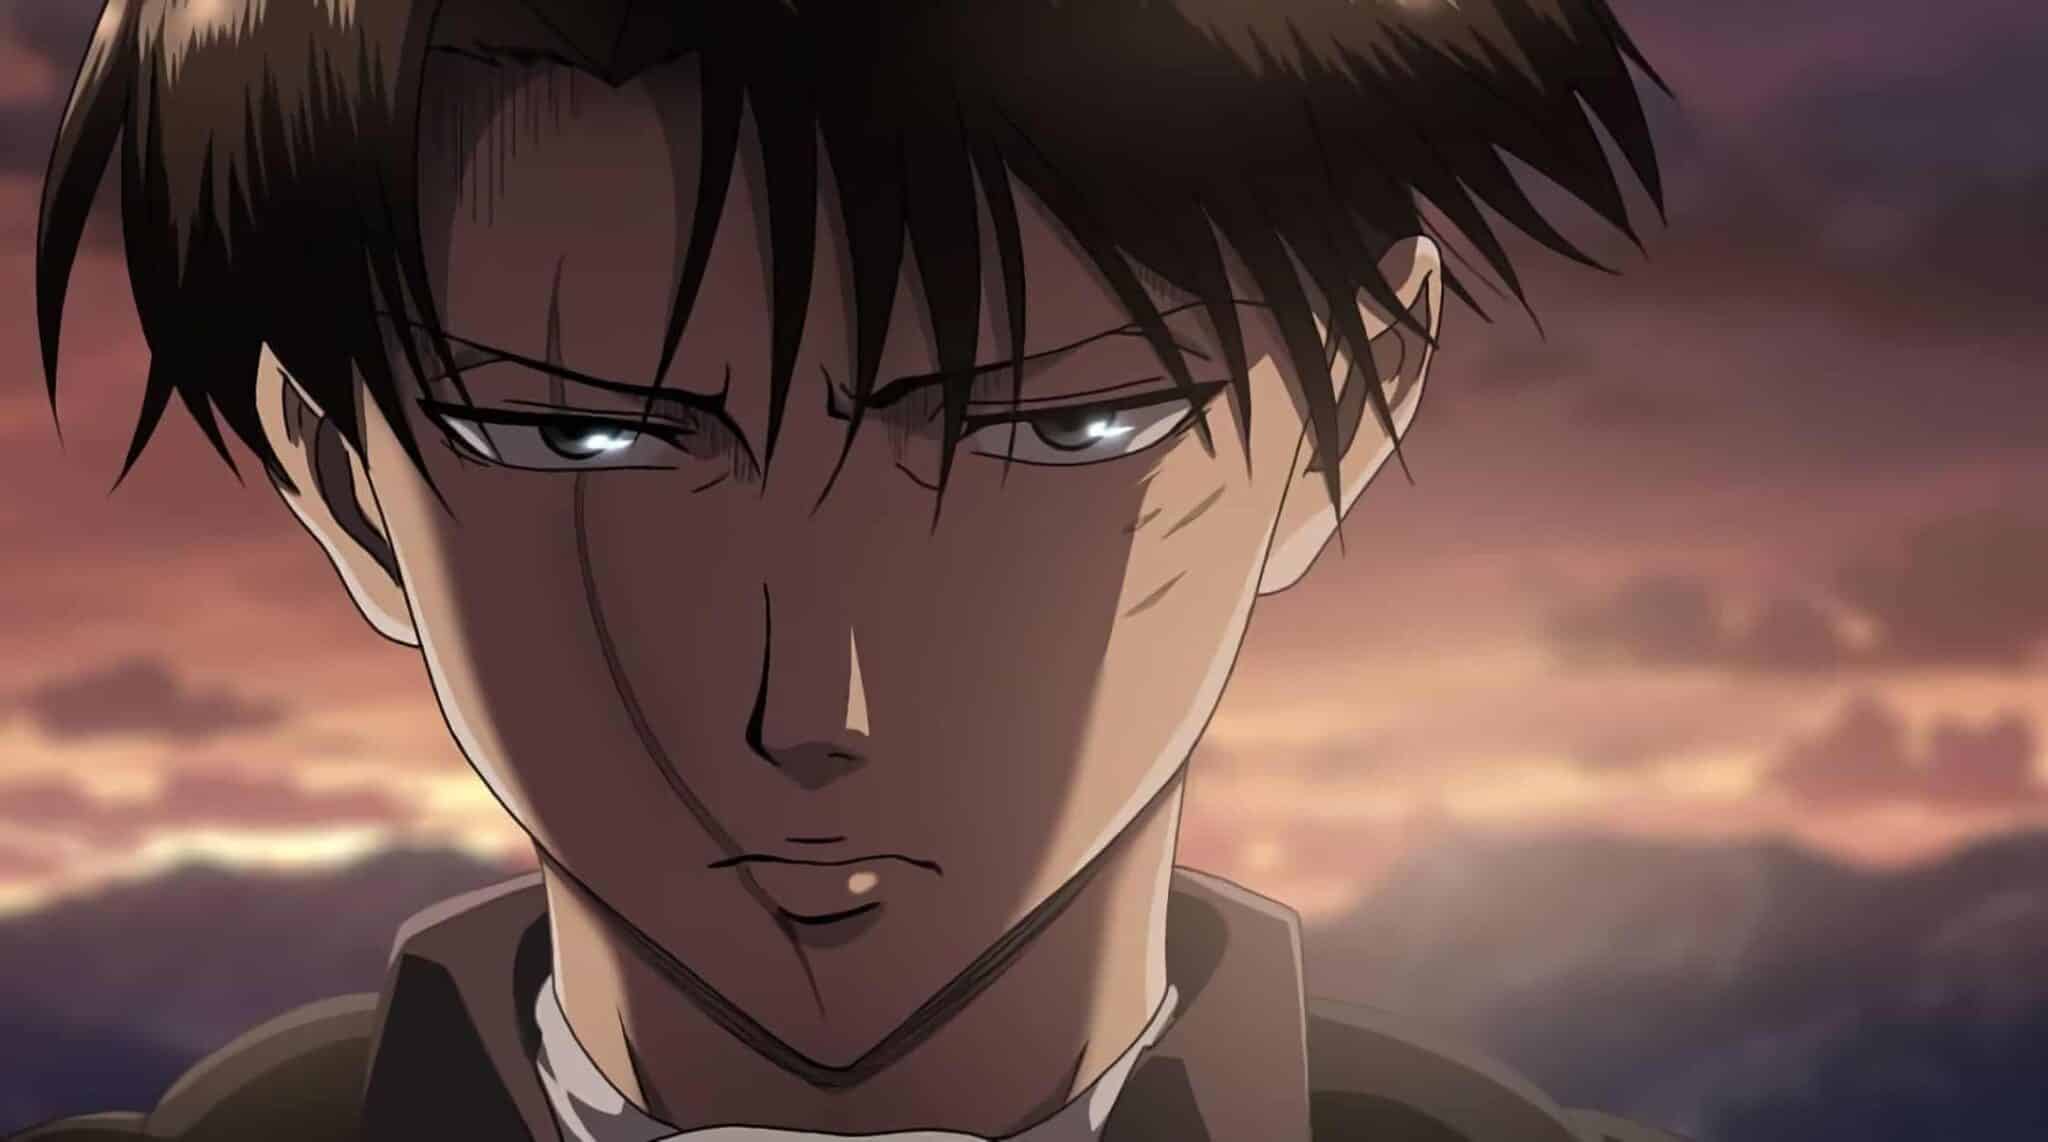 1. Levi Ackerman from Attack on Titan - wide 1